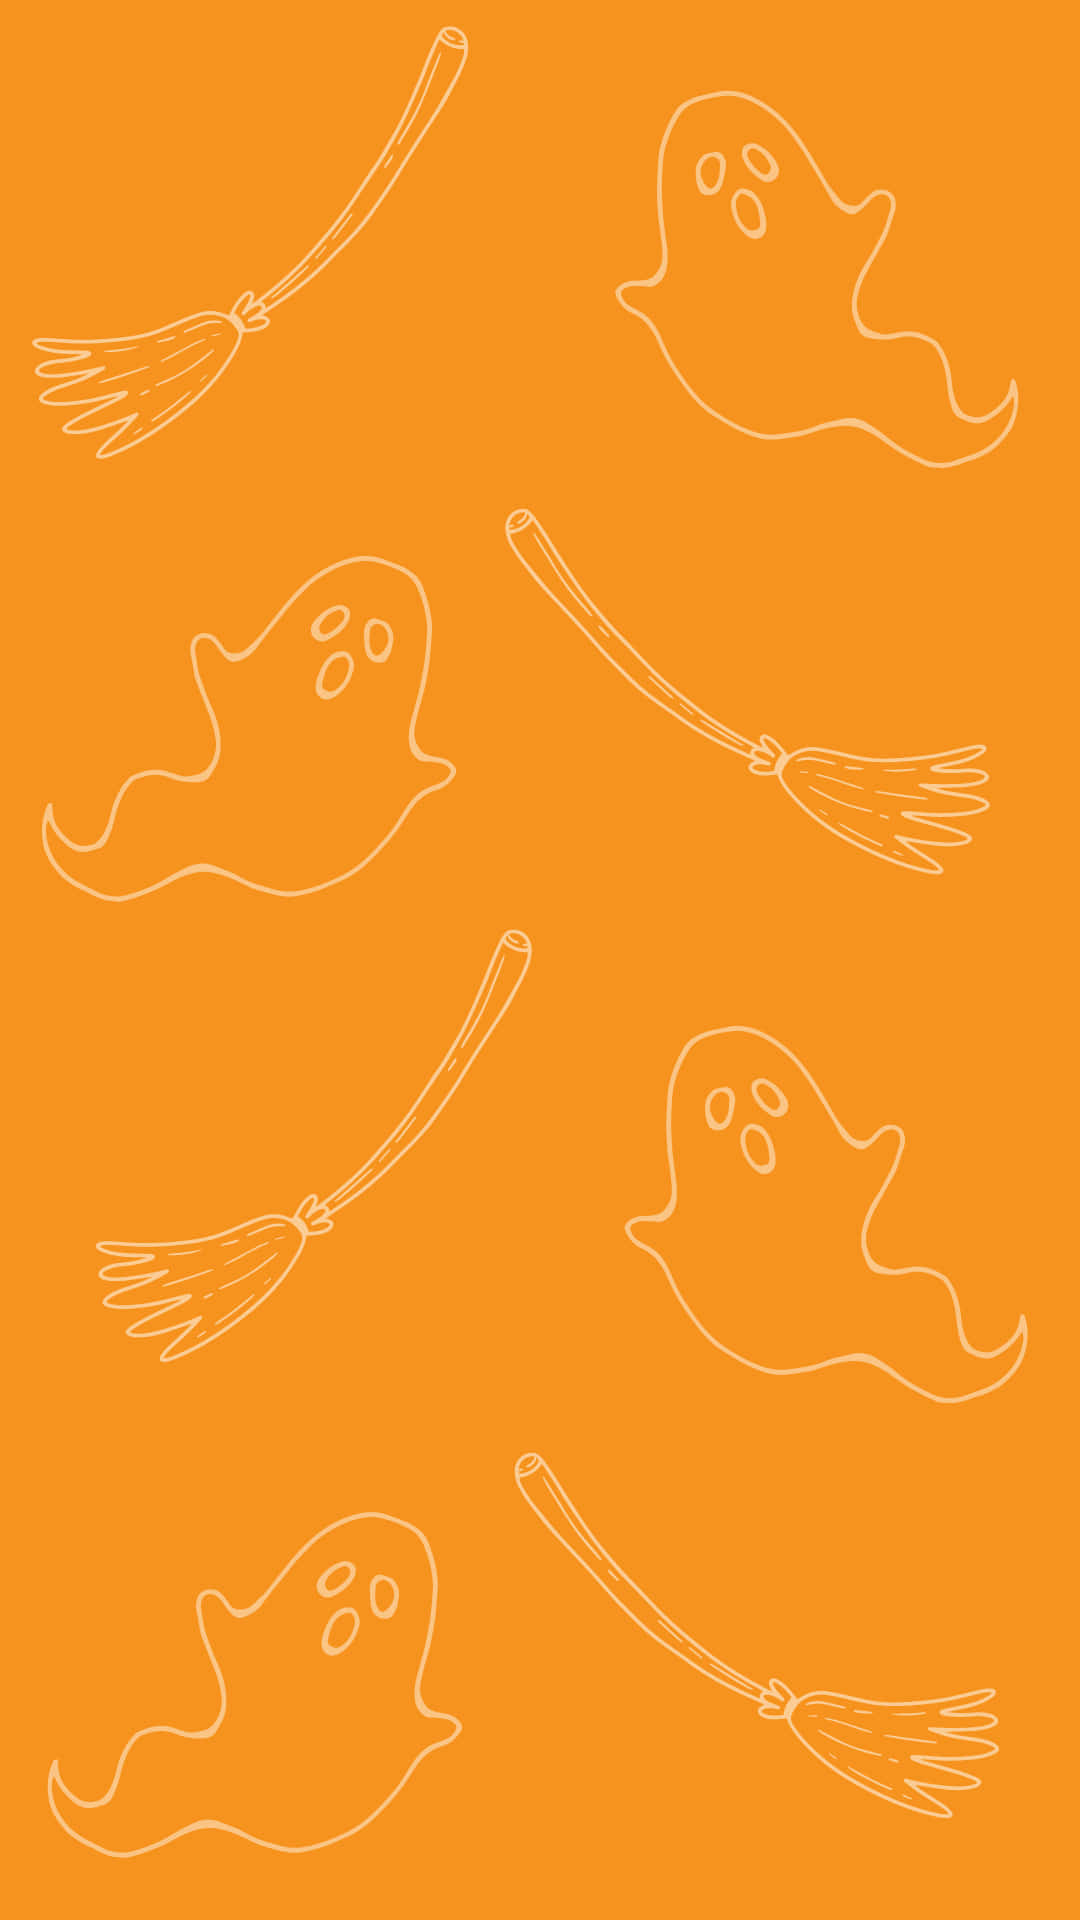 Ghosts And Brooms On An Orange Background